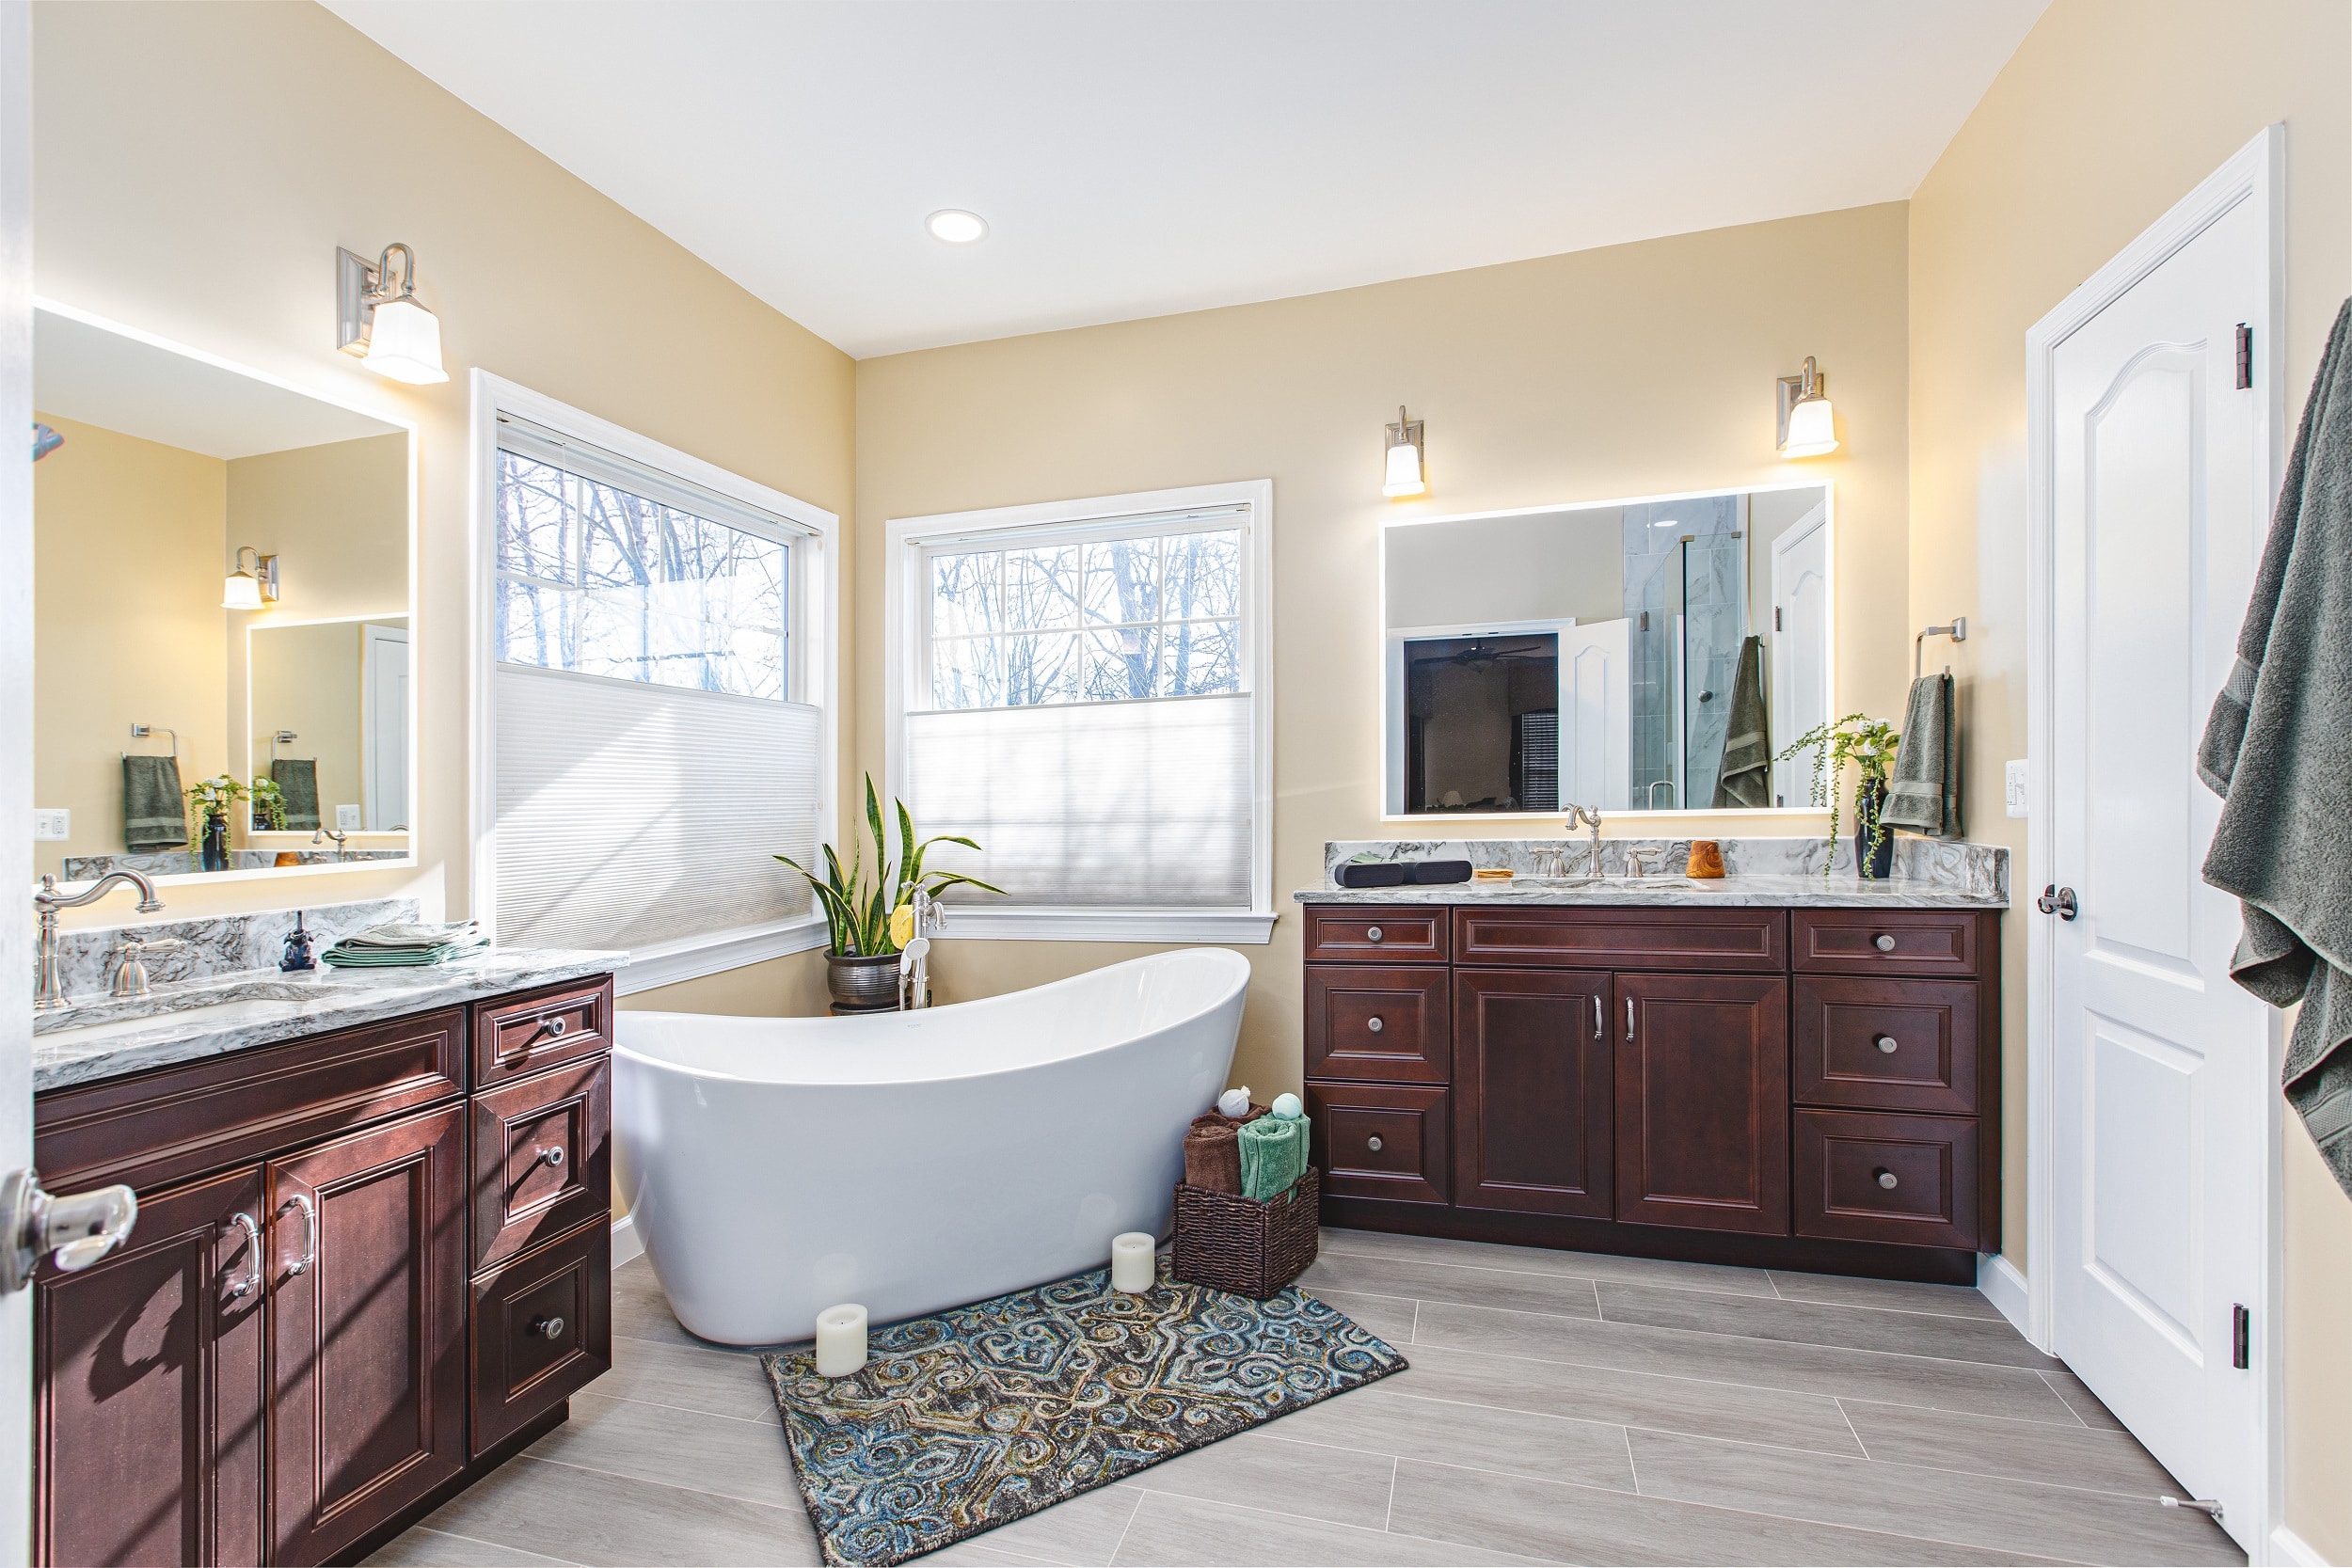 Bathroom Remodeling Process Your, Can You Remodel A Bathroom For 2000